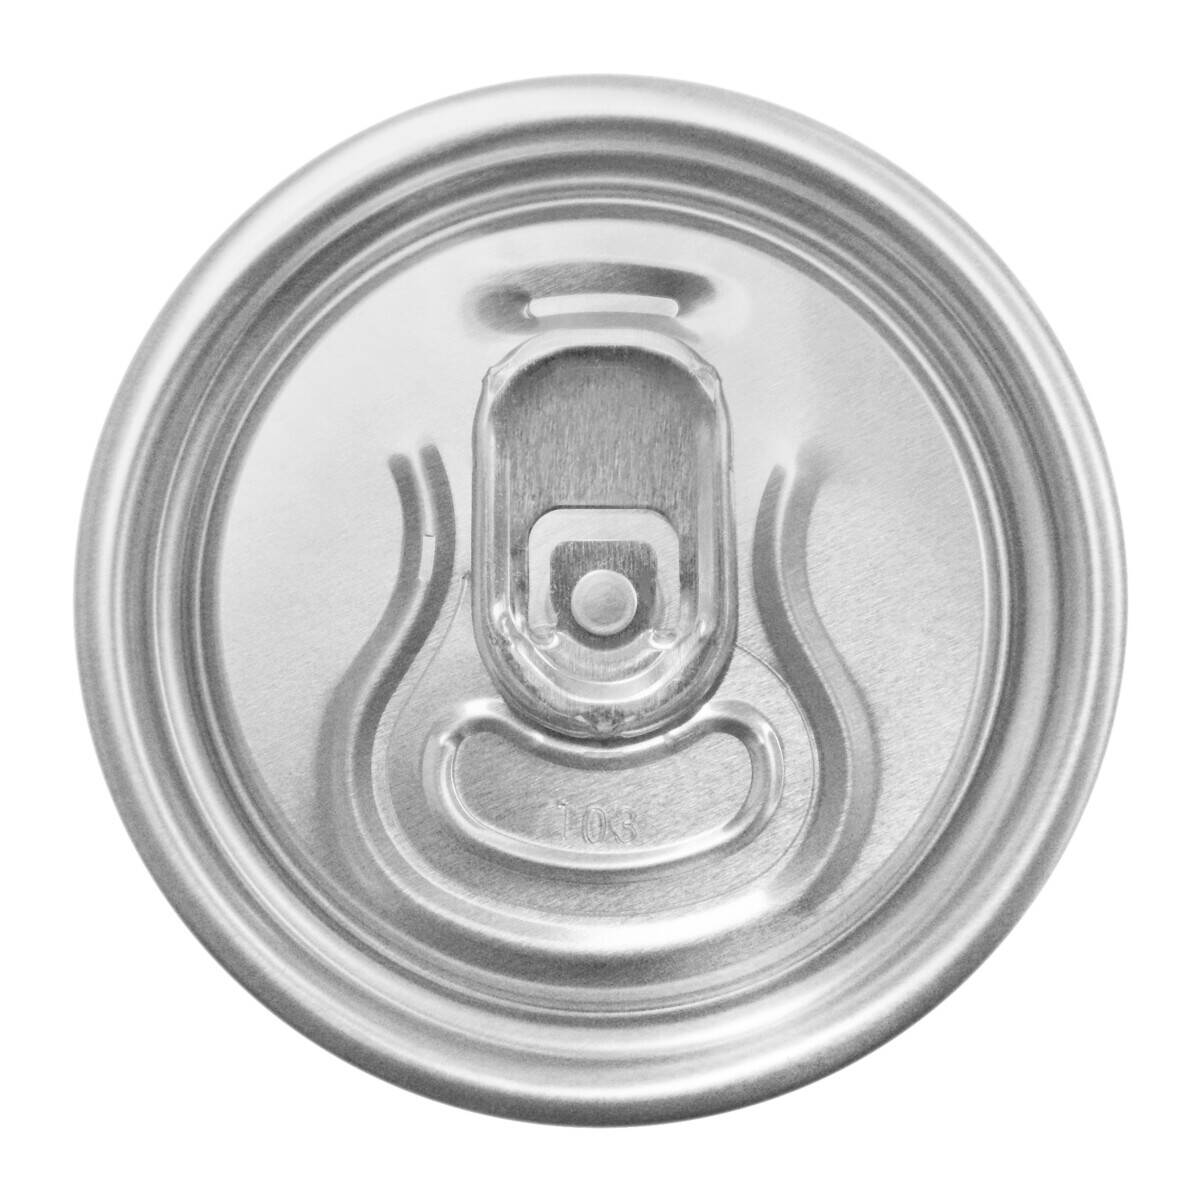 Aluminum beer cans with lids